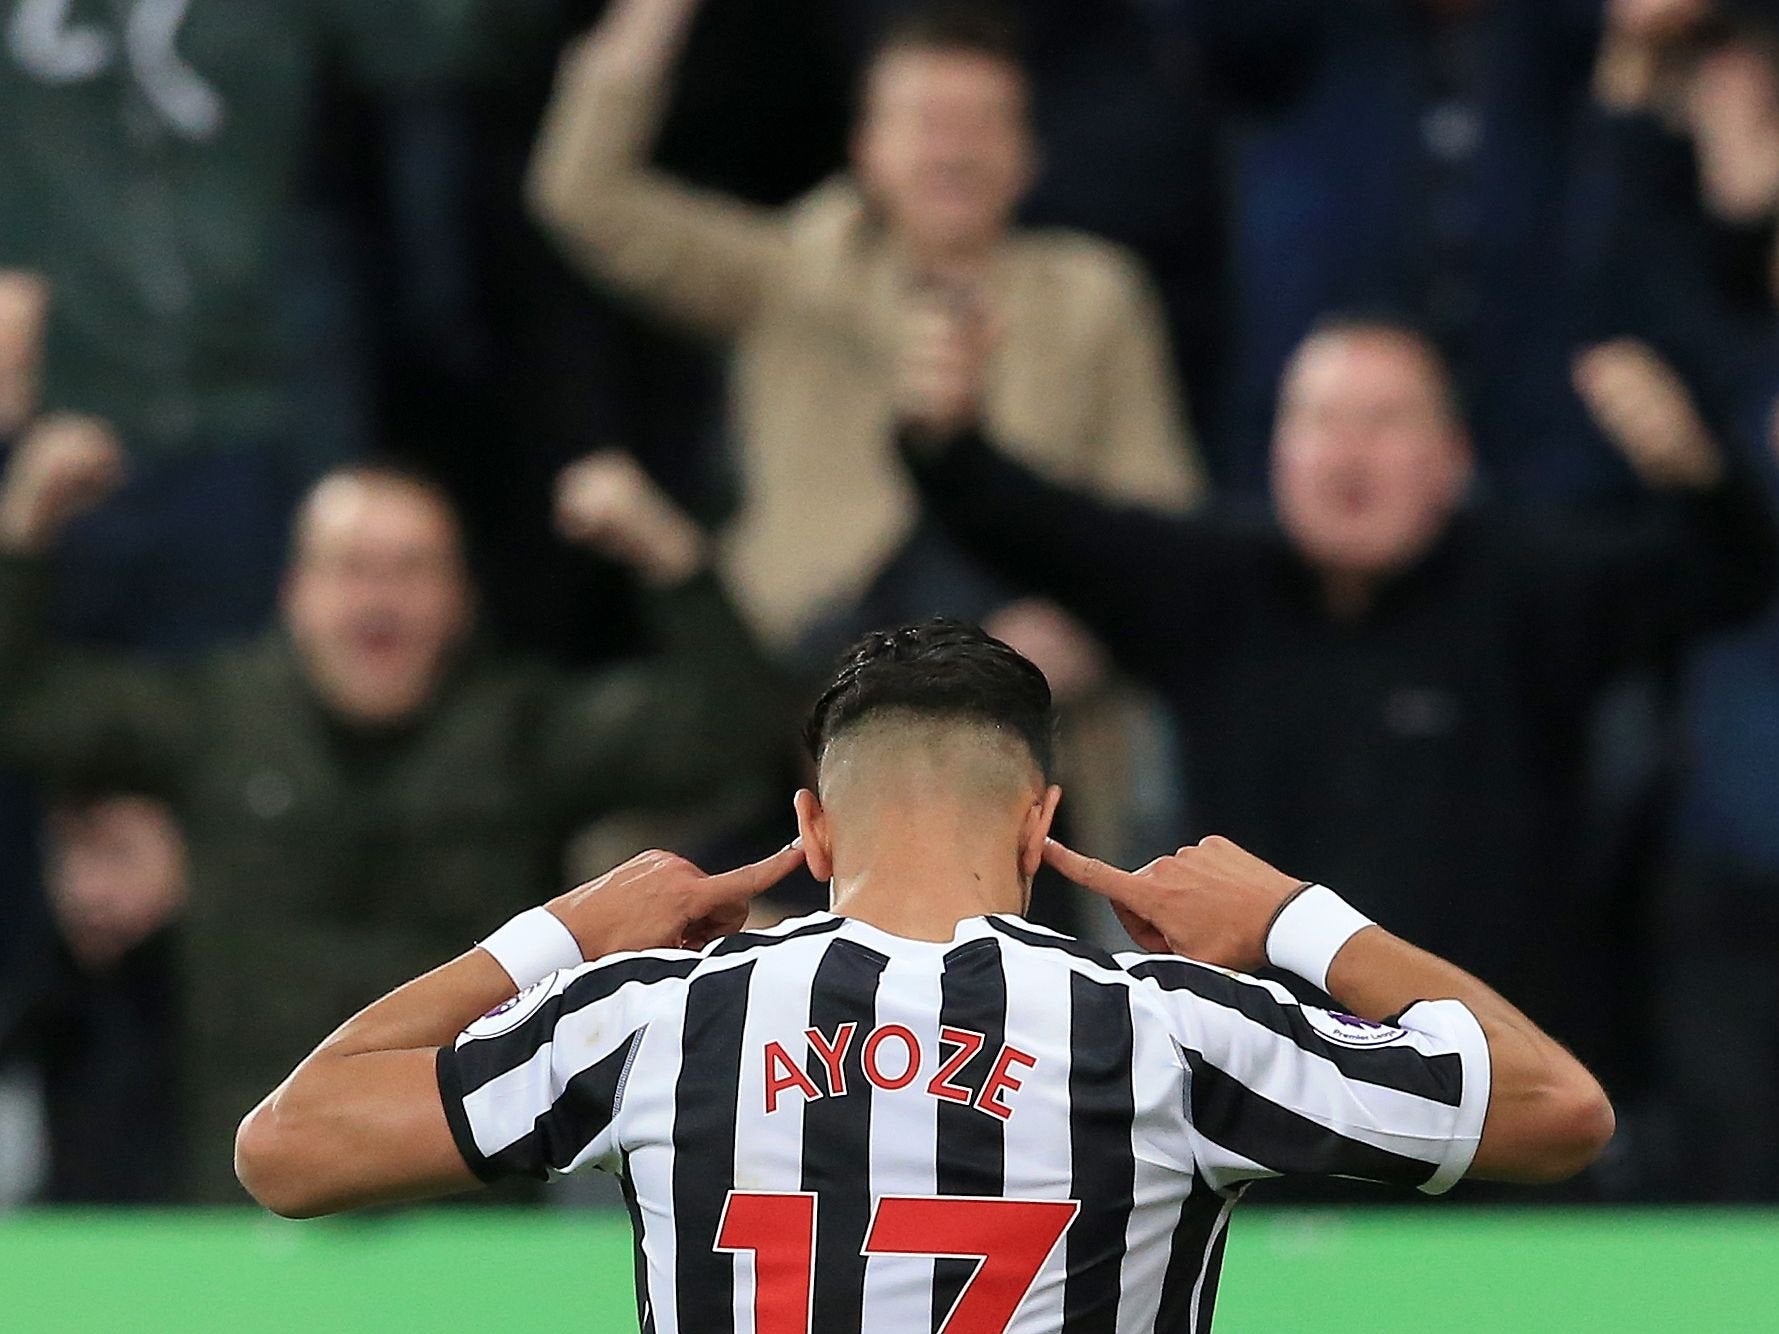 Ayoze Perez celebrated his match-winning goal in reference to the jeers he received when he came on